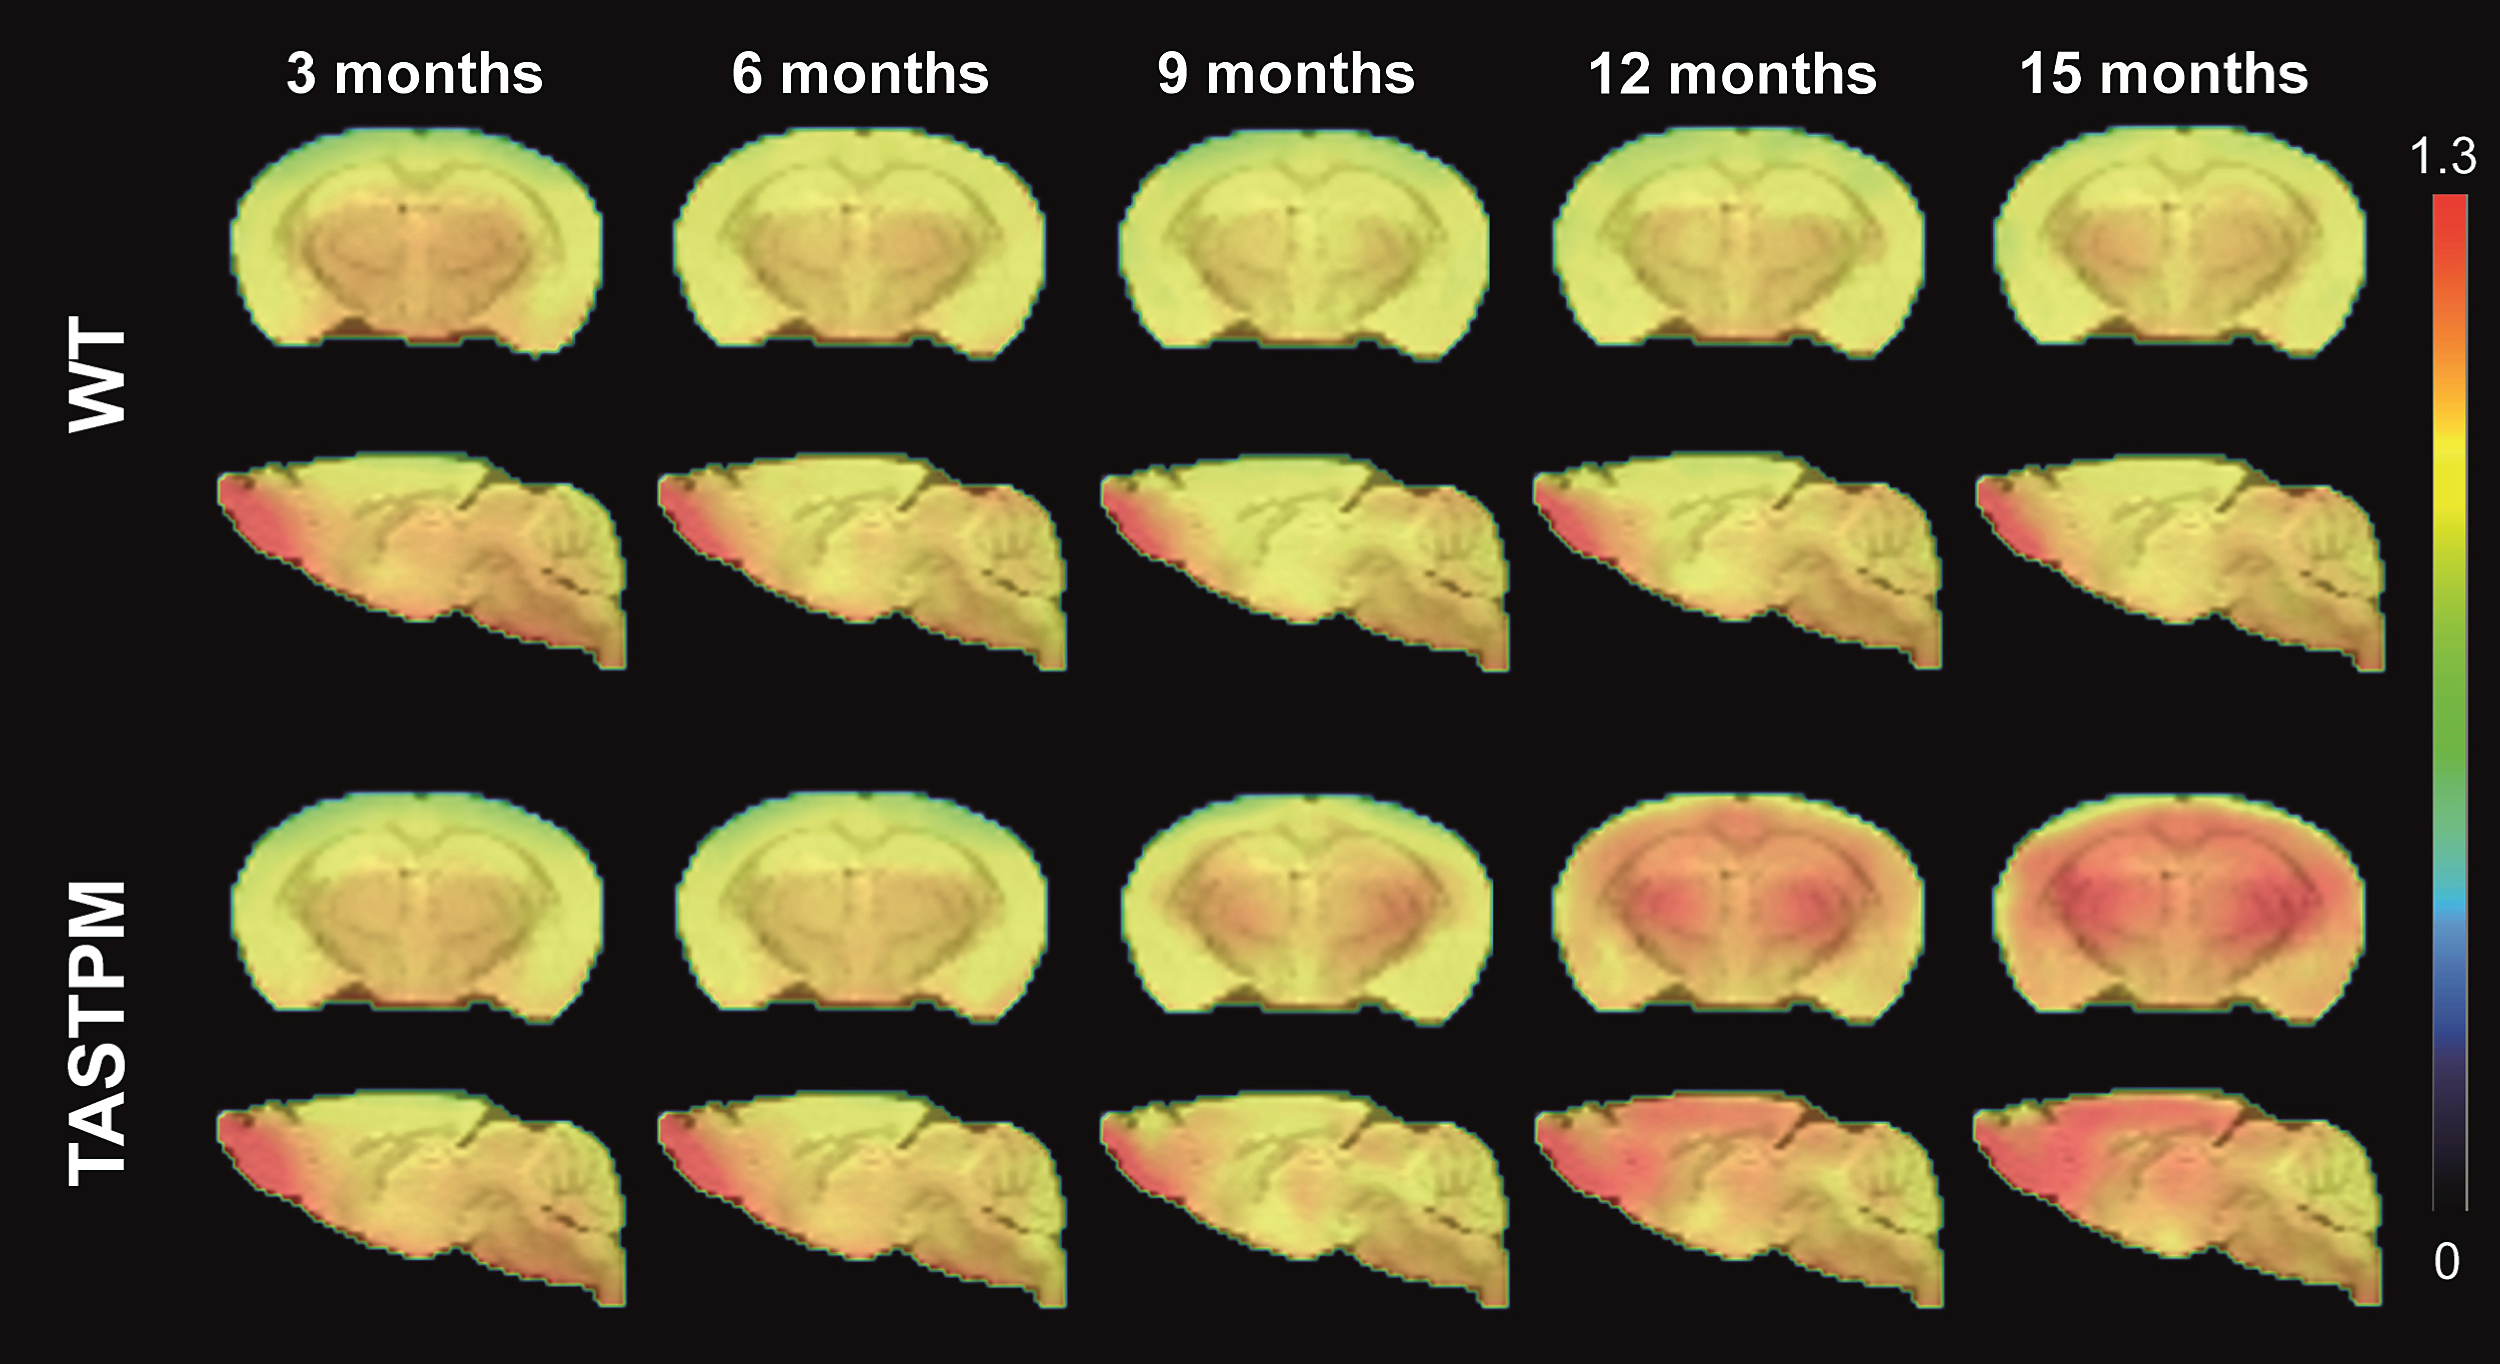 Longitudinal imaging of [18F]-AV45 uptake in WT and TASTPM mice. Average μPET images of [18F]-AV45 uptake in WT and TASTPM mice at each time point. [18F]-AV45 uptake was corrected for injected dose and normalized to the cerebellum. μPET images are overlaid on a T2-weighted MRI template for anatomic localization. 3 months (TASTPM = 22, WT = 22), 6 months (TASTPM = 15, WT = 19), 9 months (TASTPM = 12, WT = 16), 12 months (TASTPM = 8, WT = 13), 15 months (TASTPM = 5, WT = 10).